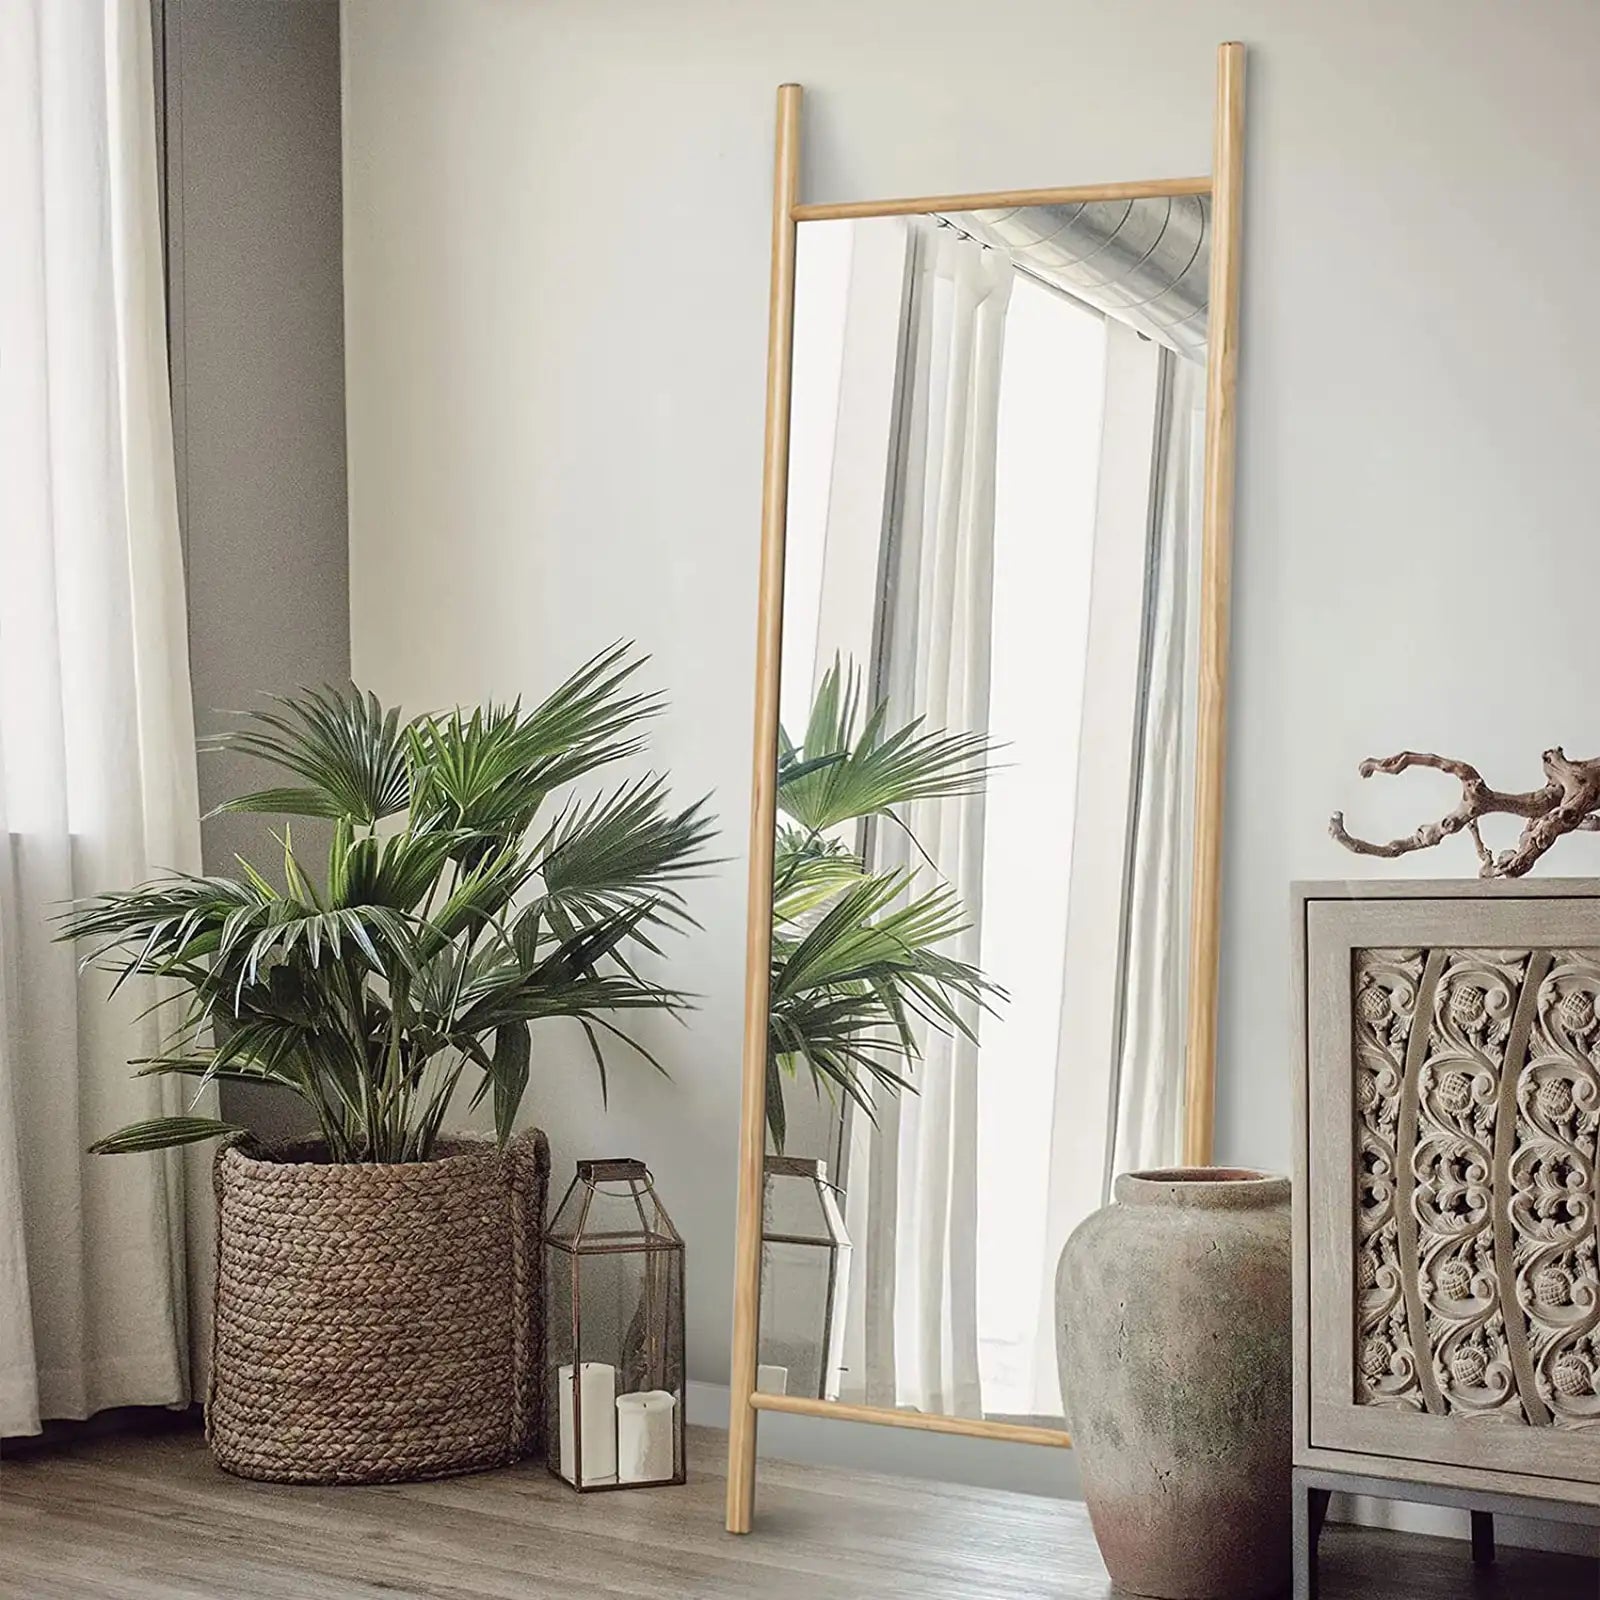 Full Length Mirror Wood 65"x22", Wooden-Ladder Floor Dressing Mirror with Full Size in Bedroom, Living Room and Shopping Mall